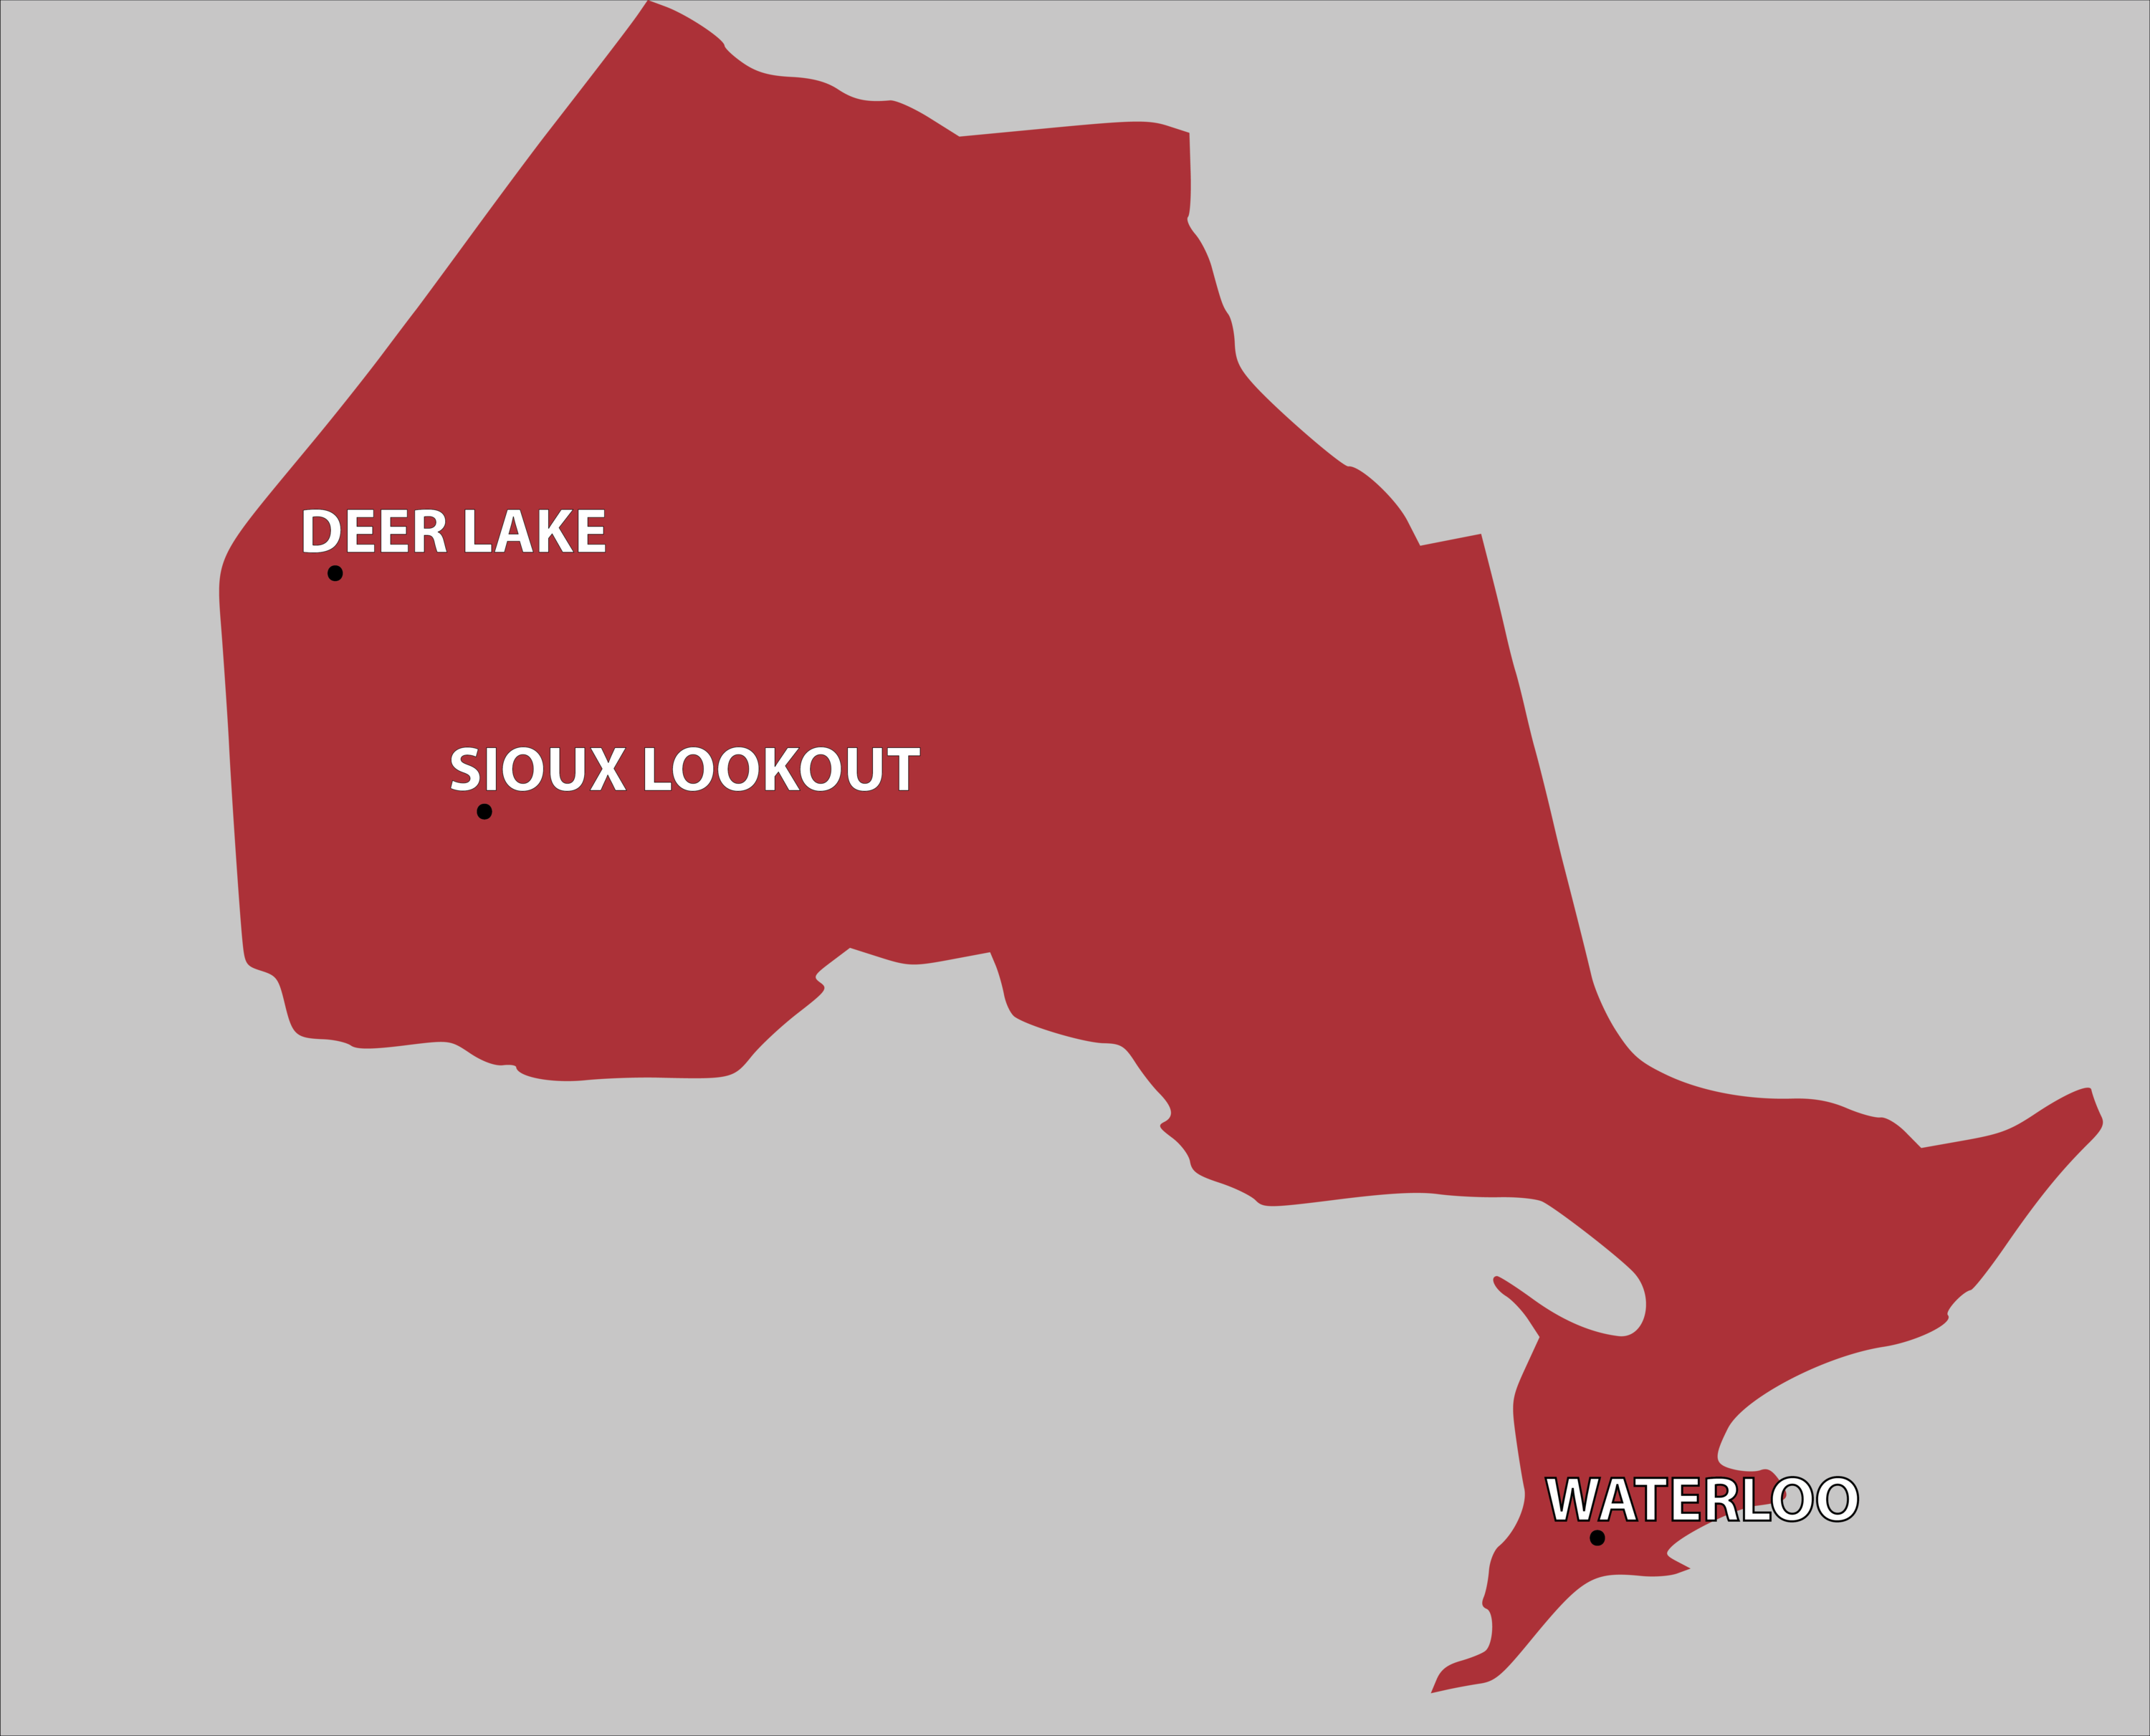 Map of Ontario showing Kitchener Waterloo, Sioux Lookout and Deer Lake